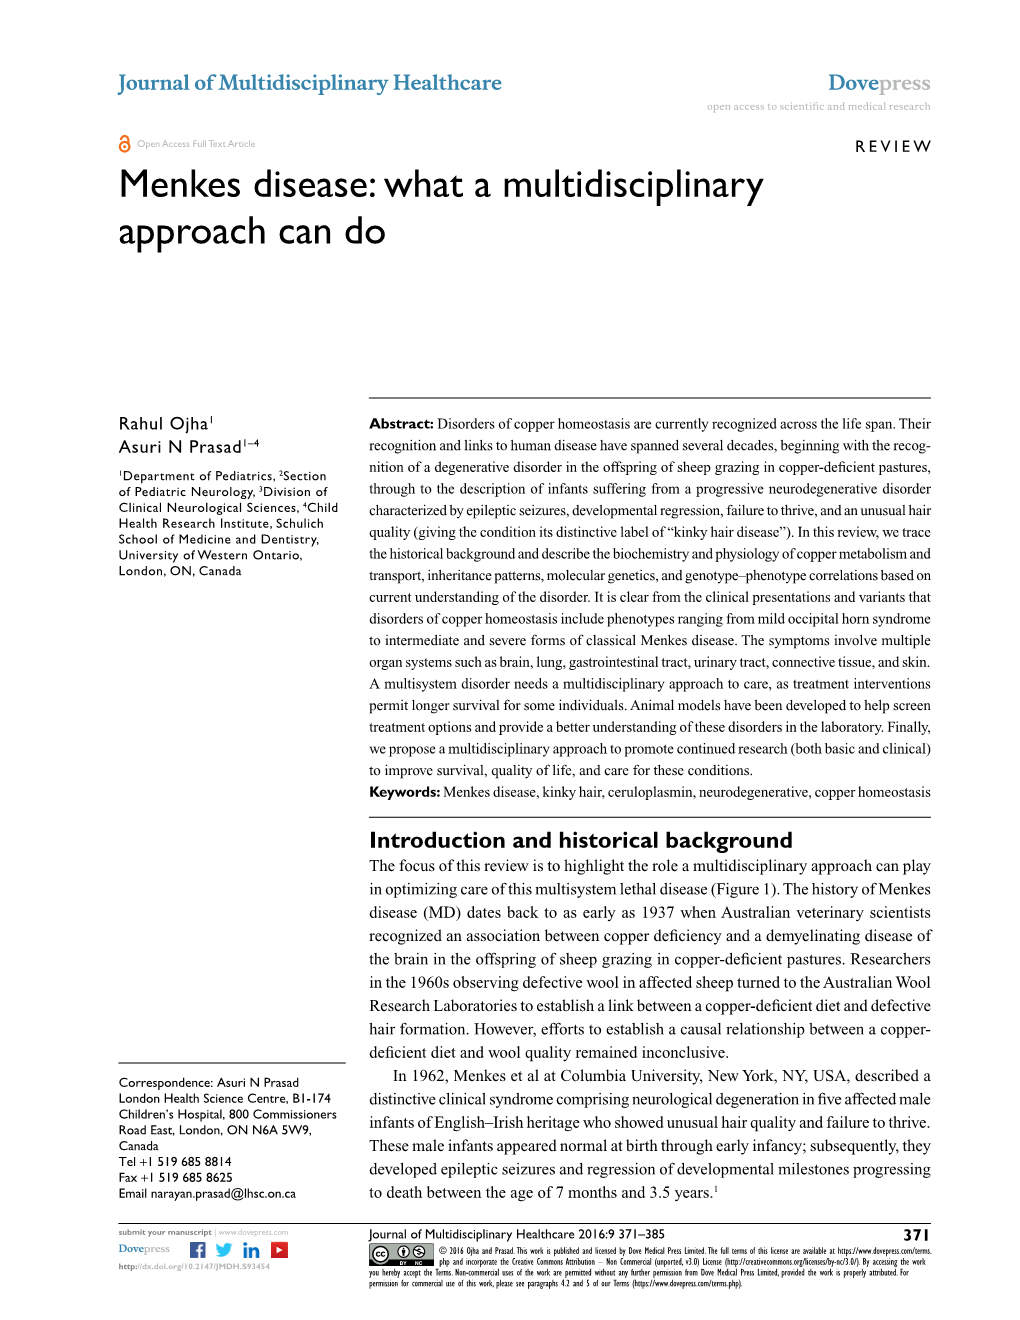 Menkes Disease: What a Multidisciplinary Approach Can Do